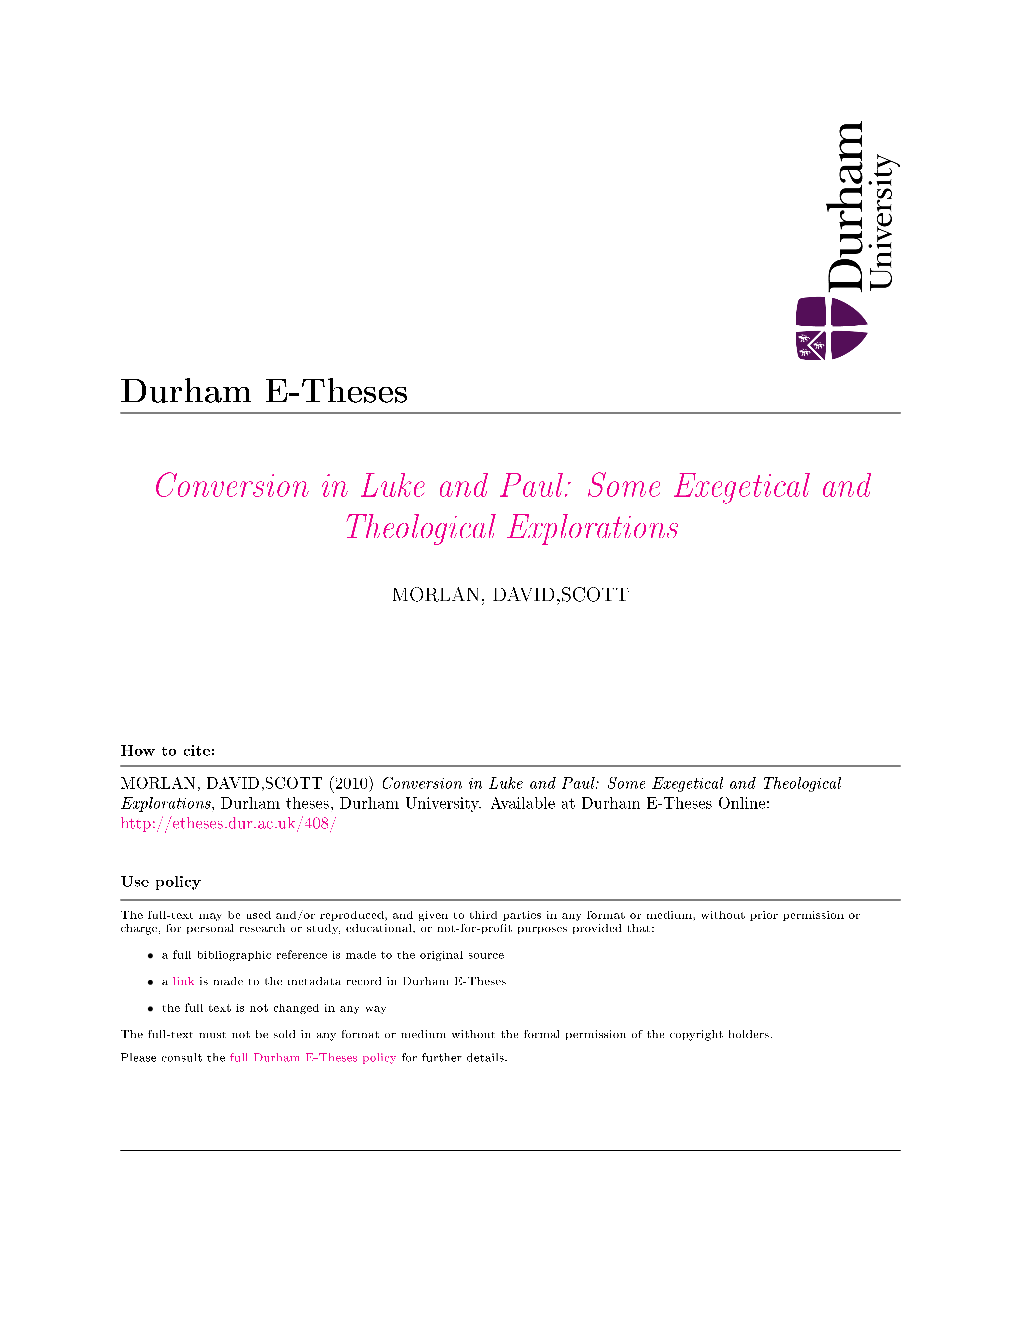 Conversion in Luke and Paul: Some Exegetical and Theological Explorations